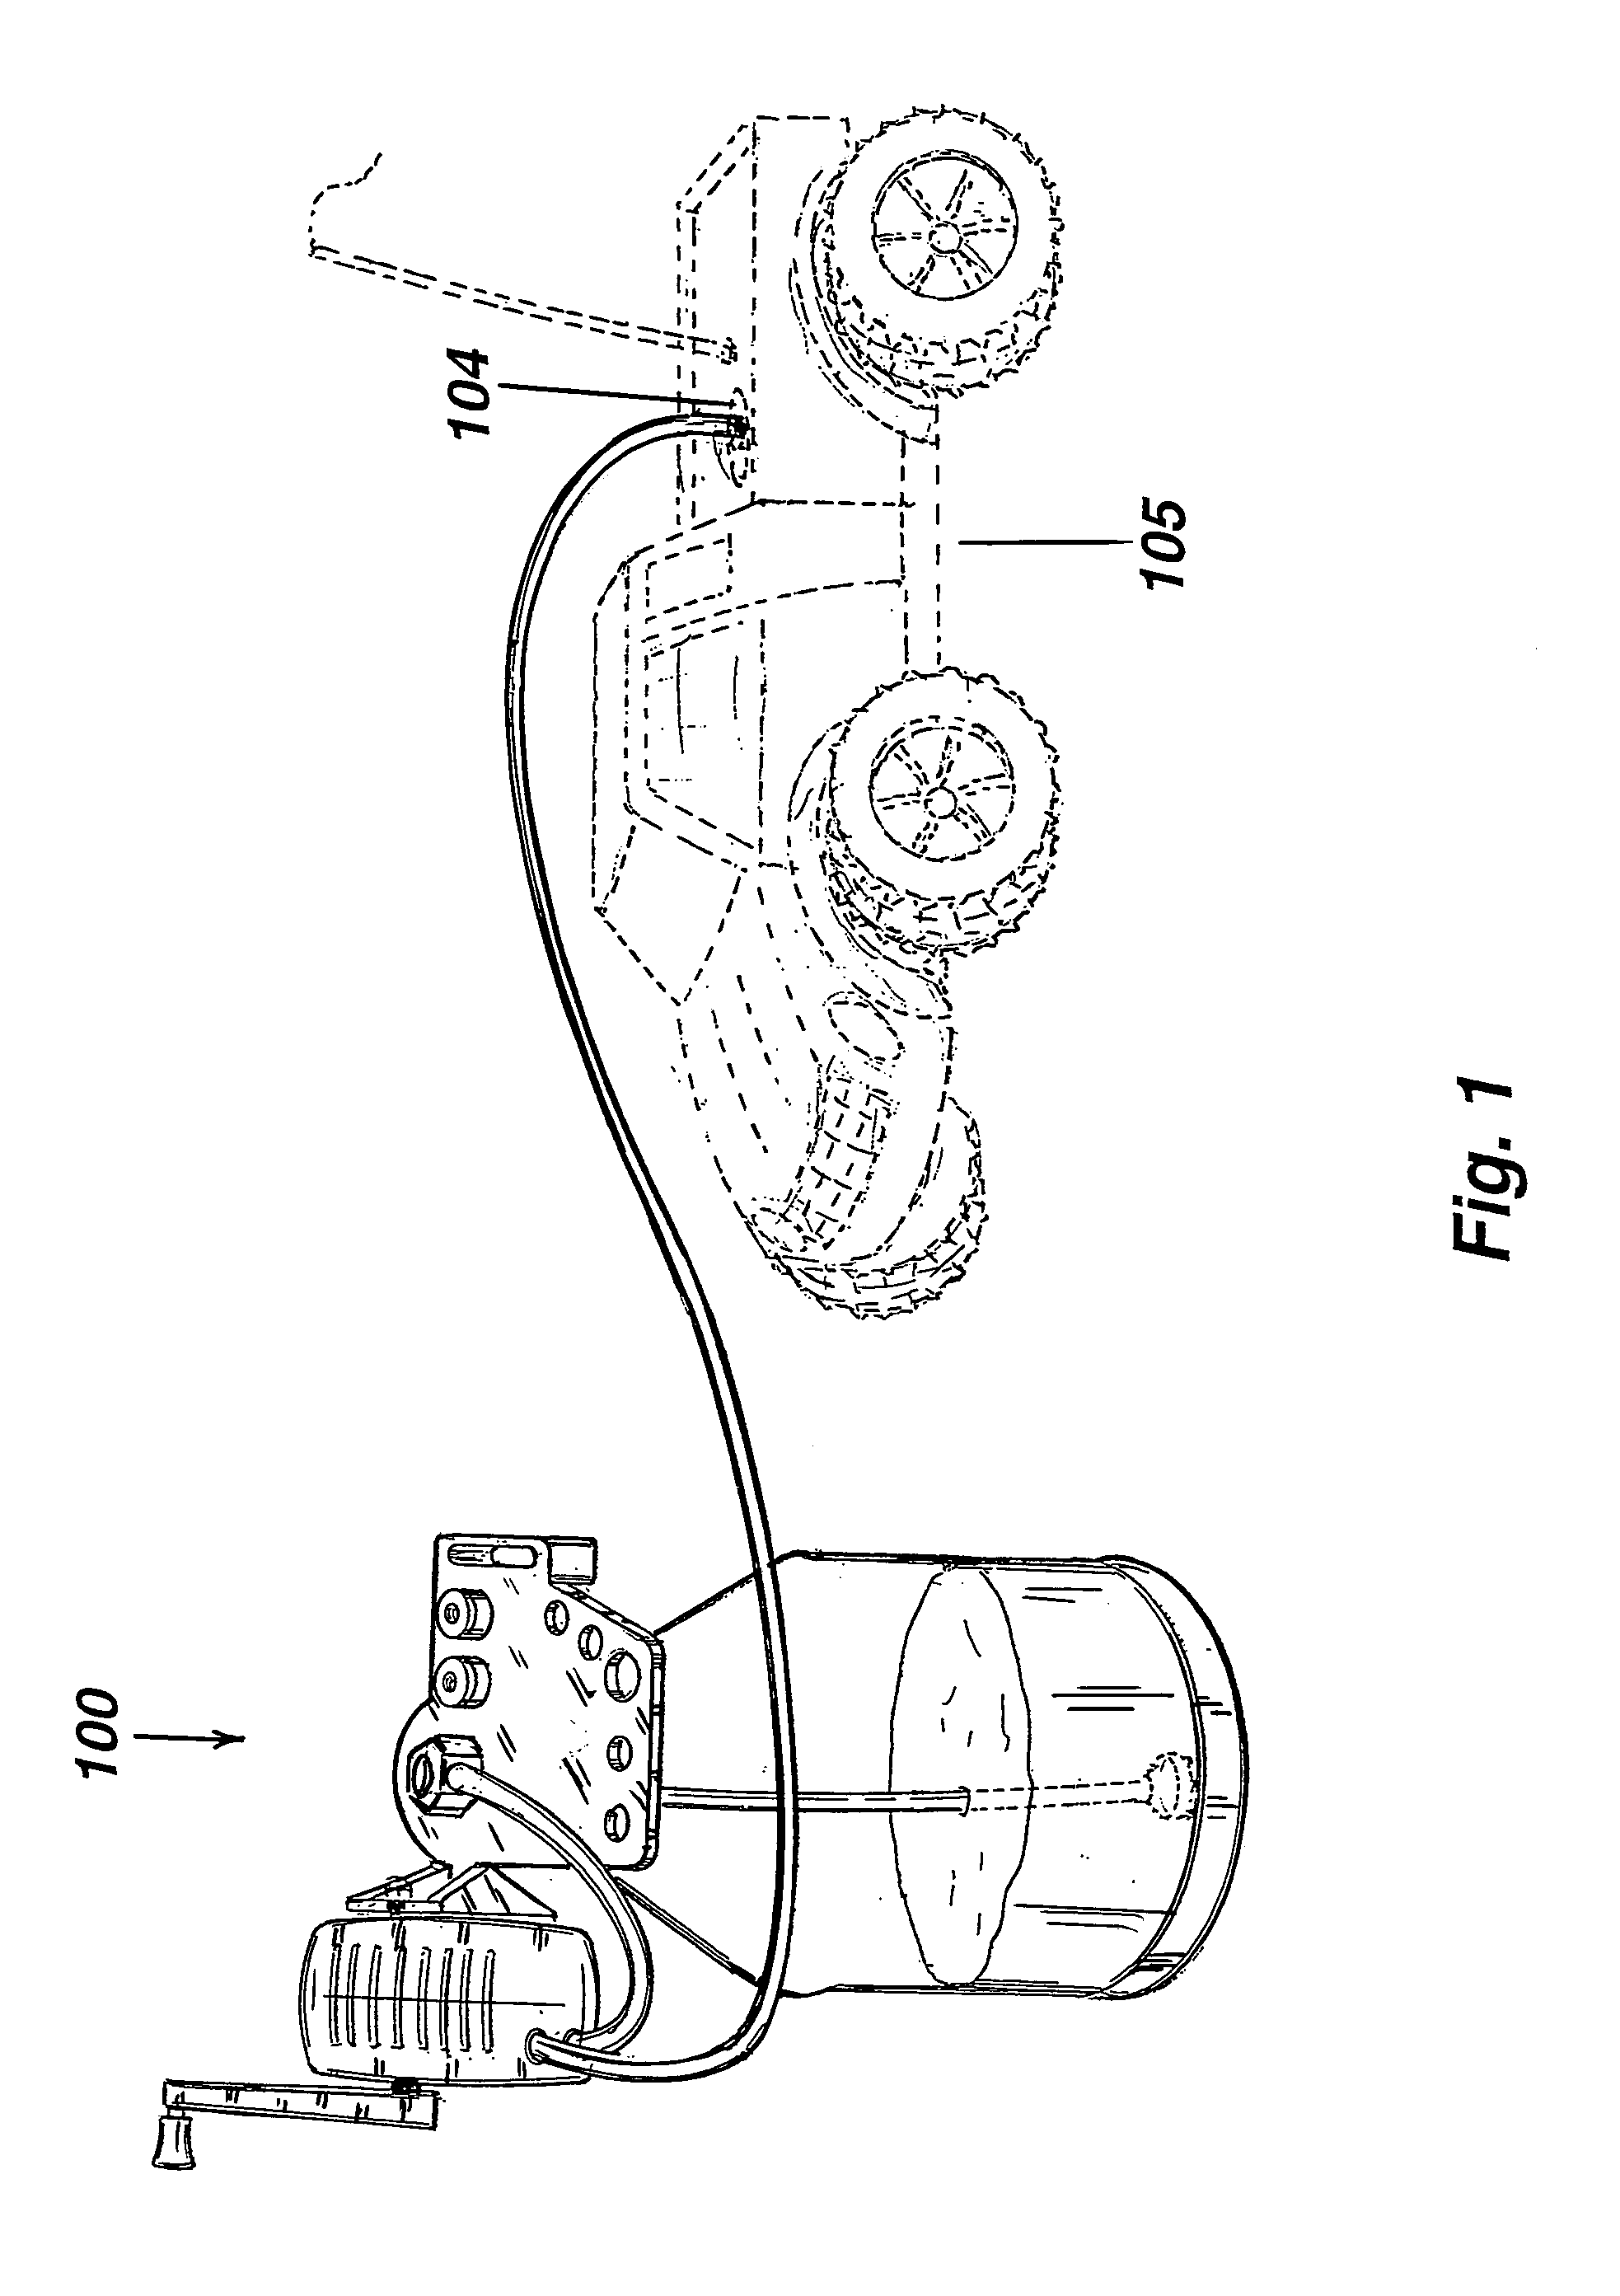 Portable fuel assembly